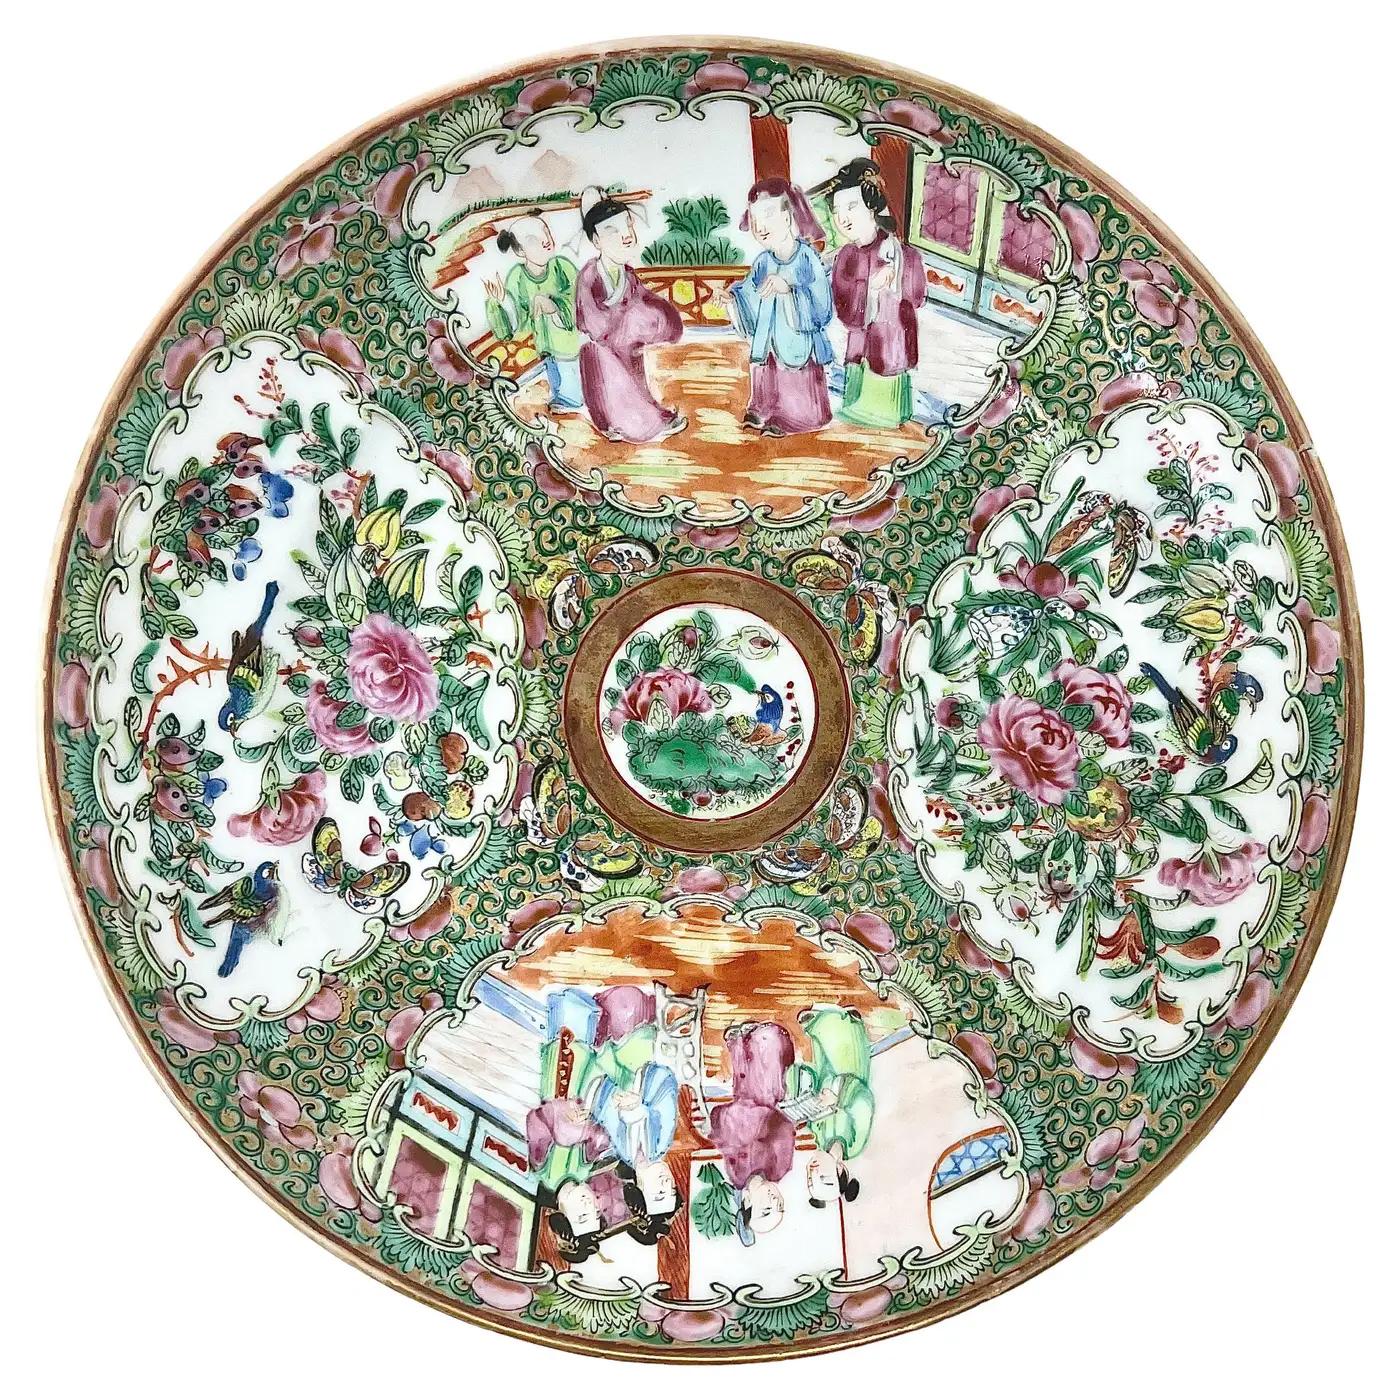 19th Century Special Listing for the Purchase of 3 Famille Rose Porcelain Plates at Once. For Sale